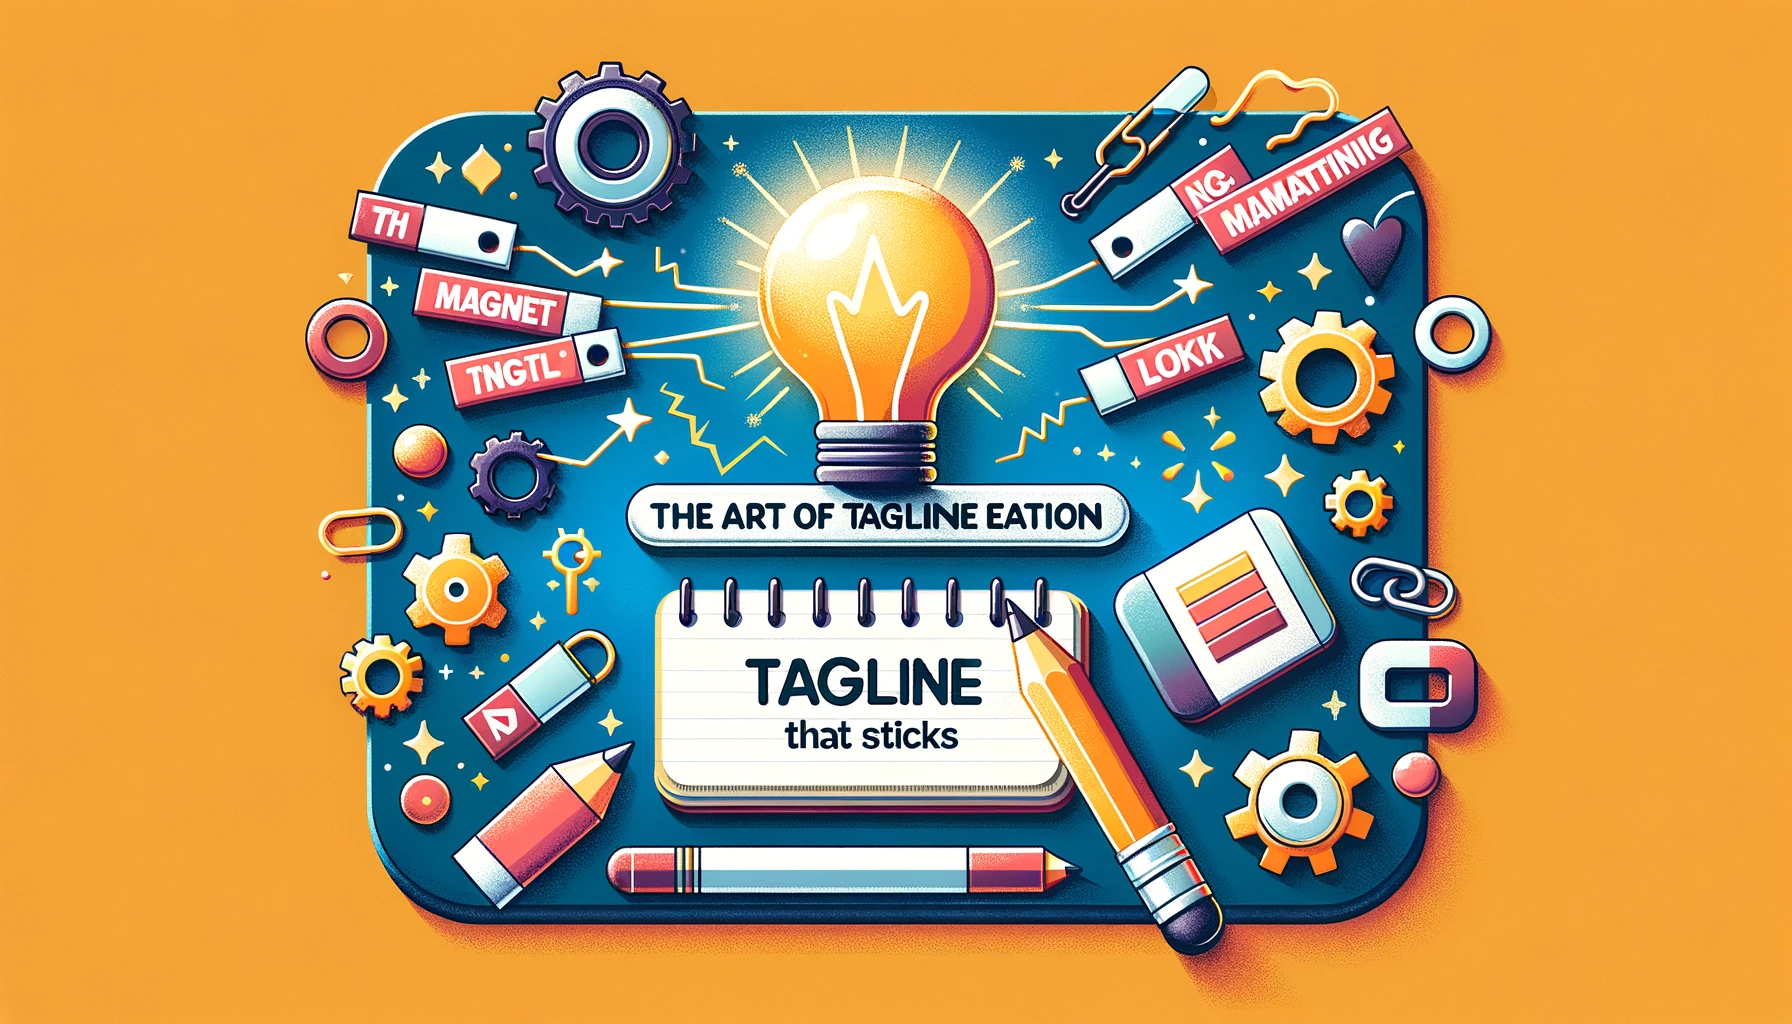 The Art of Tagline Creation: How to Write a Tagline That Sticks